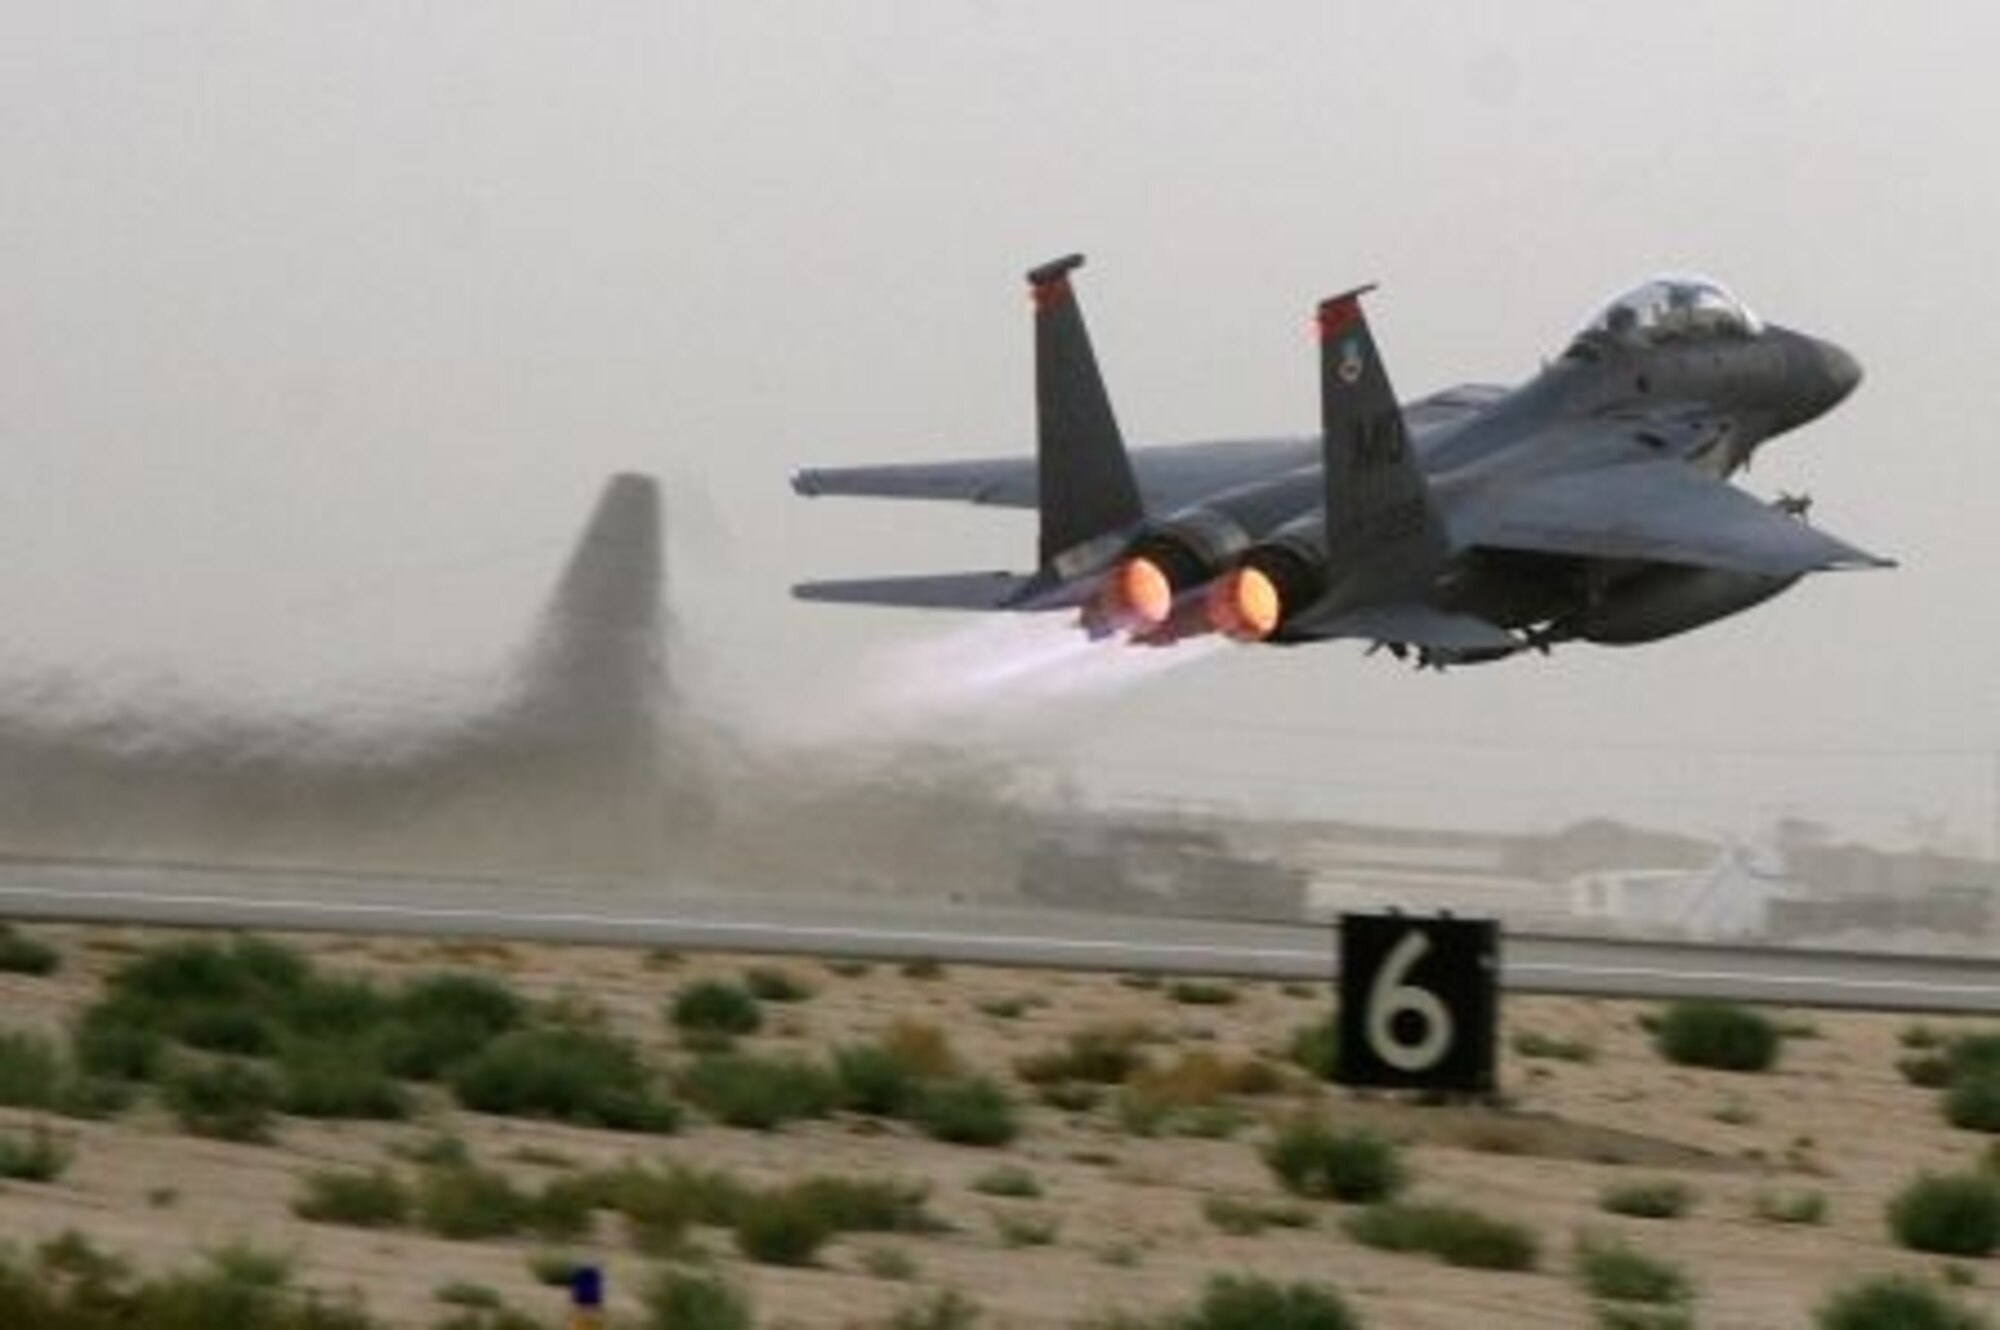 An F-15E Strike Eagle takes off from an air base in Afghanistan recently. The Strike Eagle is a dual-role fighter designed to perform air-to-air and air-to-ground missions. An array of avionics and electronics systems gives the F-15E the capability to fight at low altitude, day or night, and in all weather. 